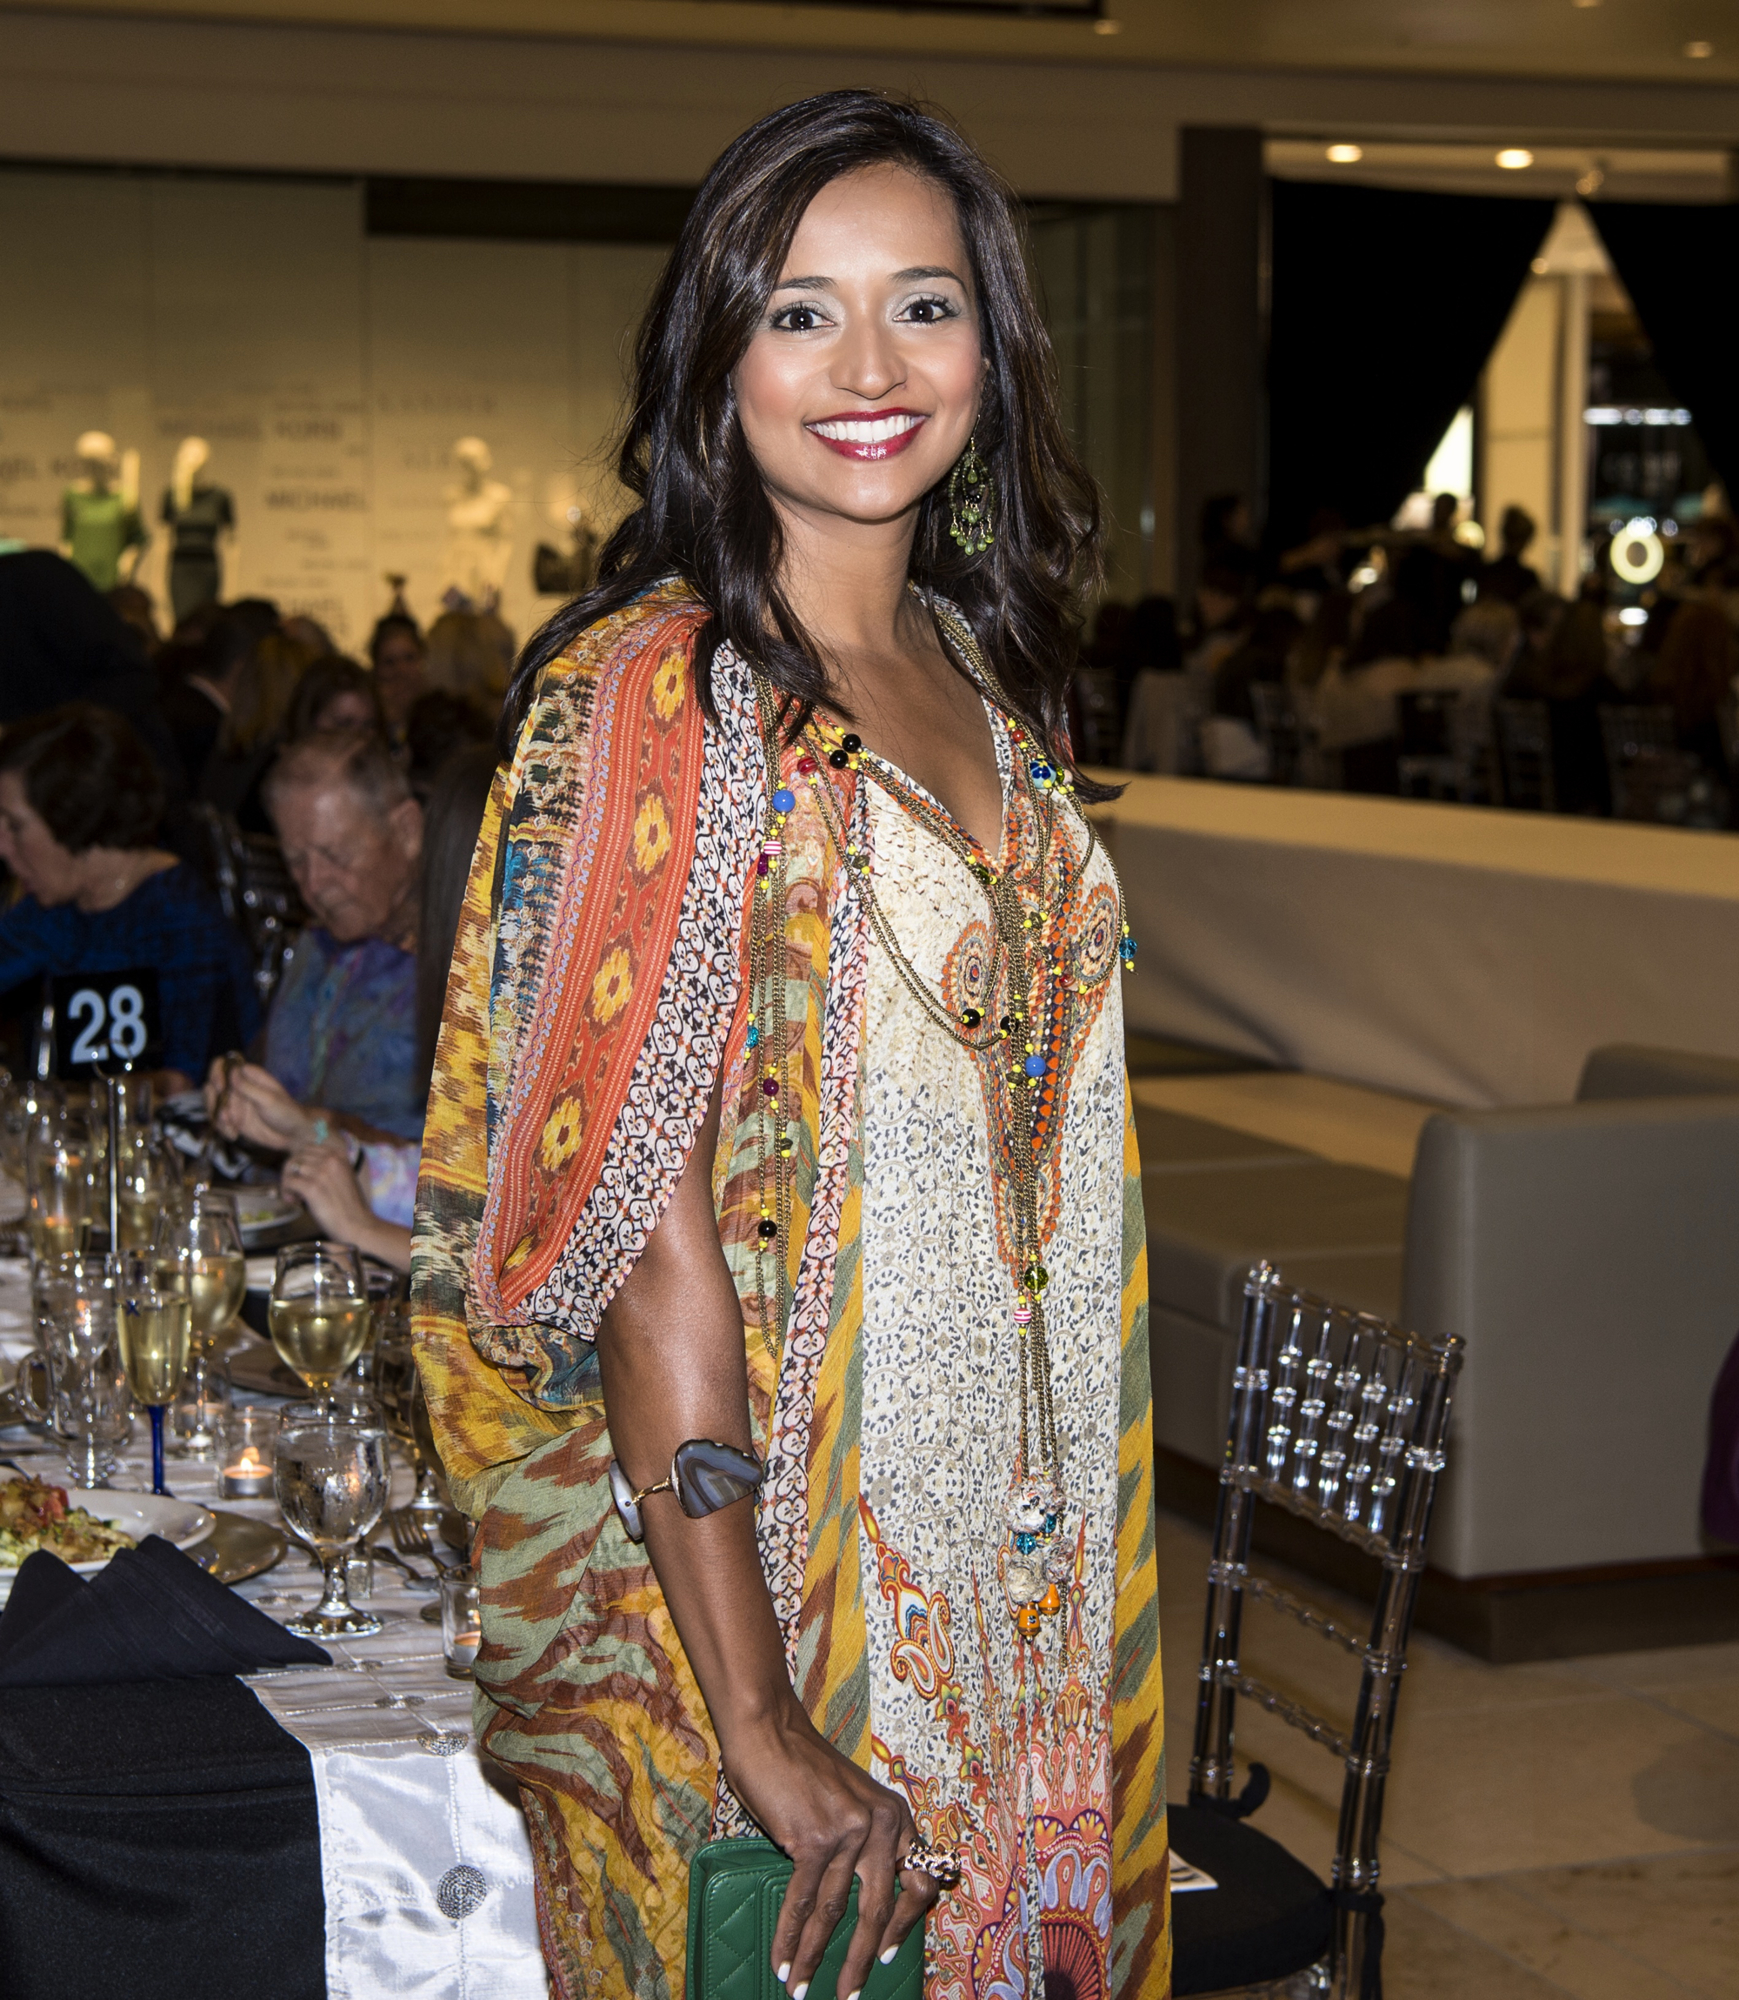 Umbreen Khalidi-Majeed stuns at iconcept 2016 on Feb. 21, held at Saks Fifth Avenue. Photo by Cliff Roles